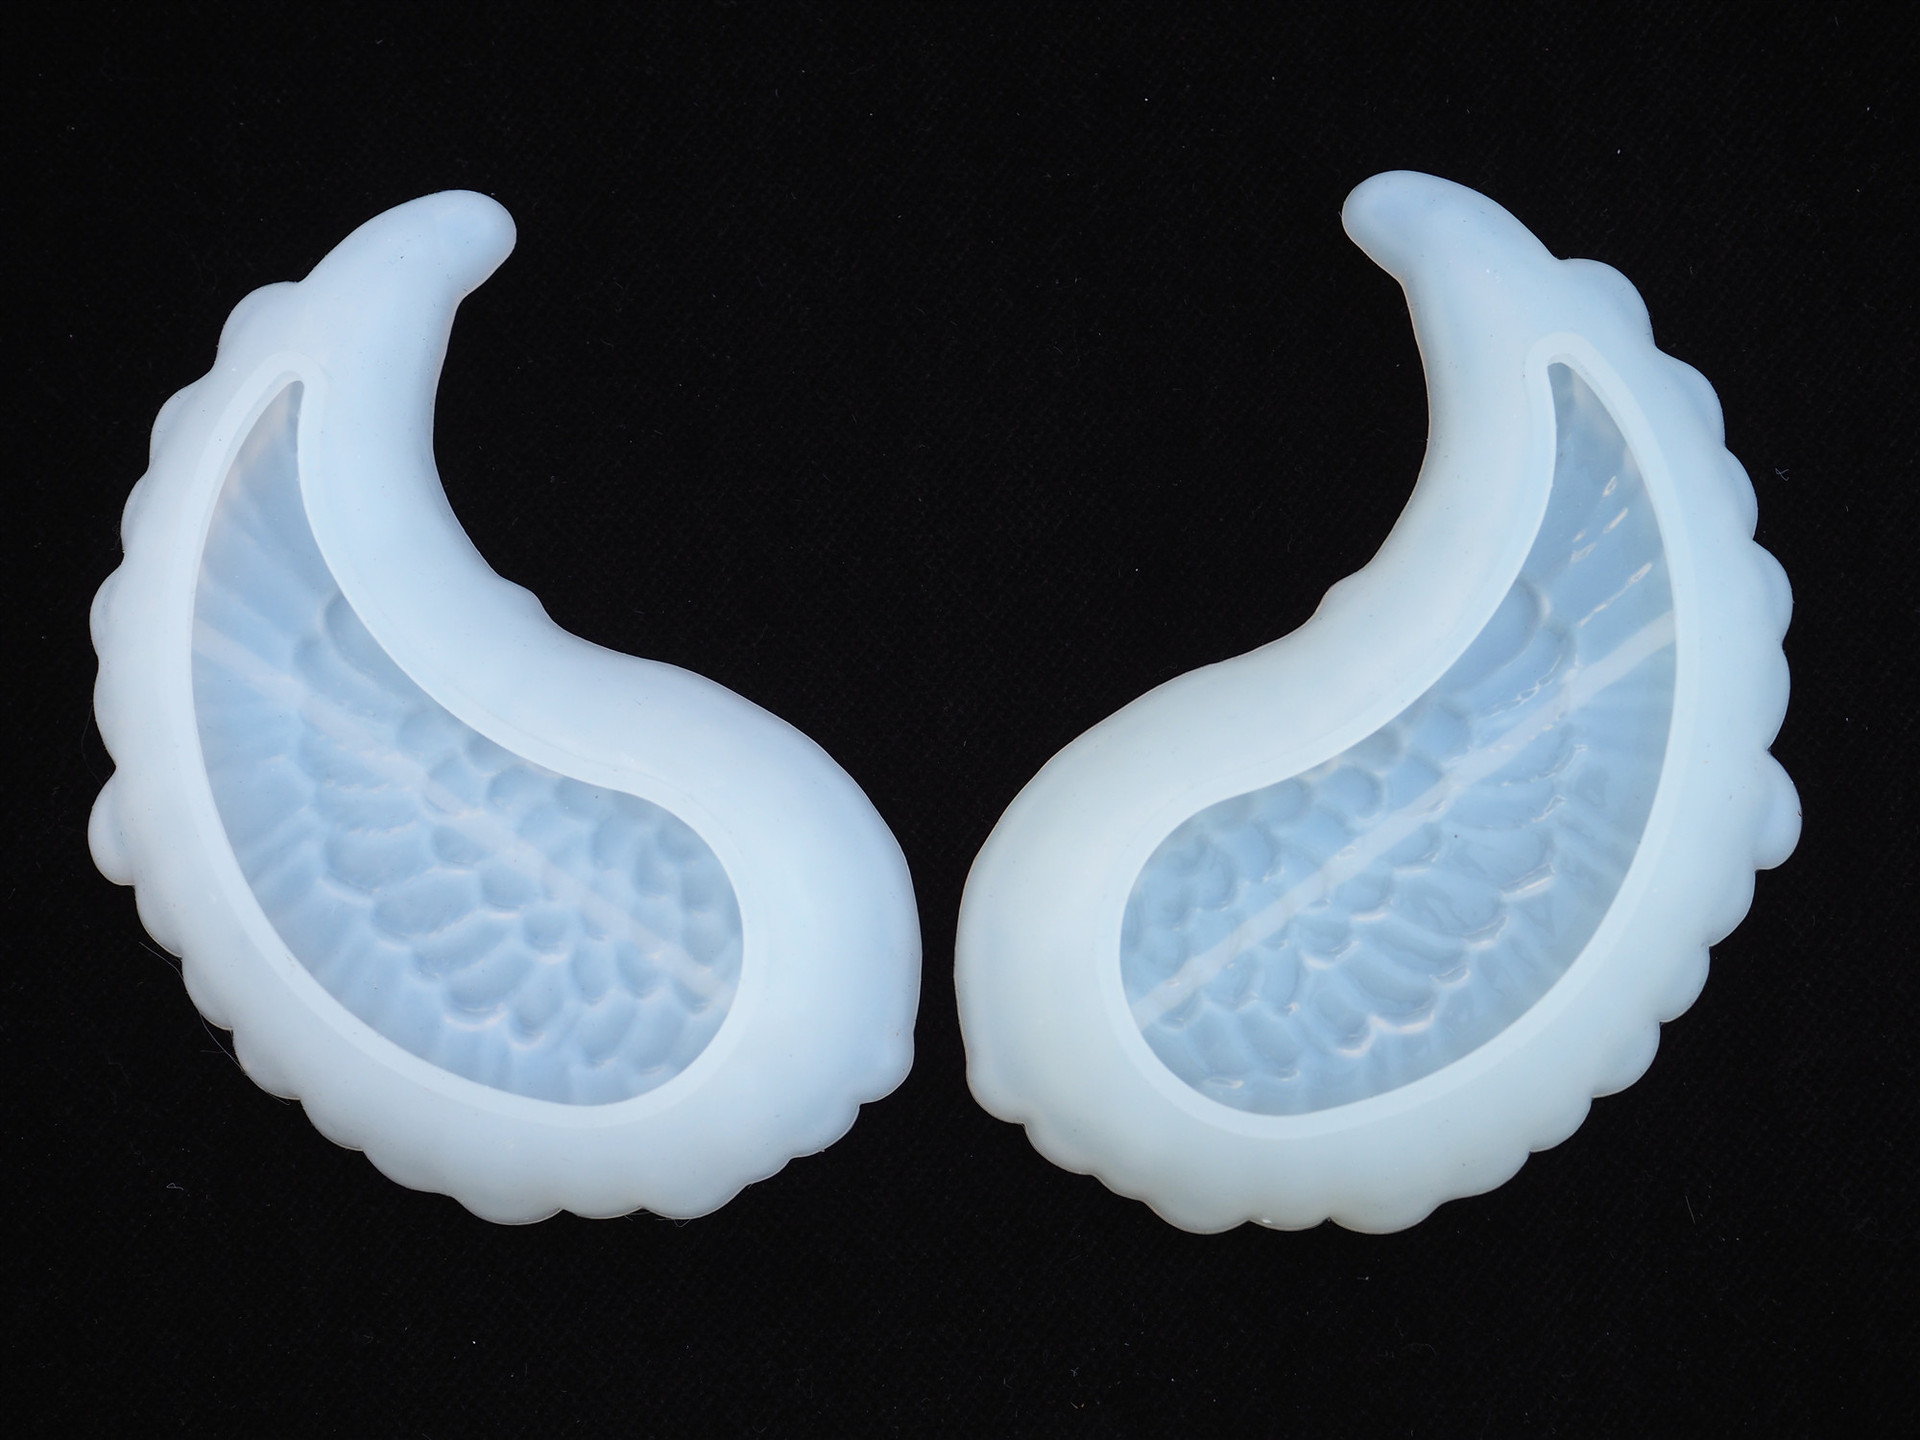 1:Pair of molds